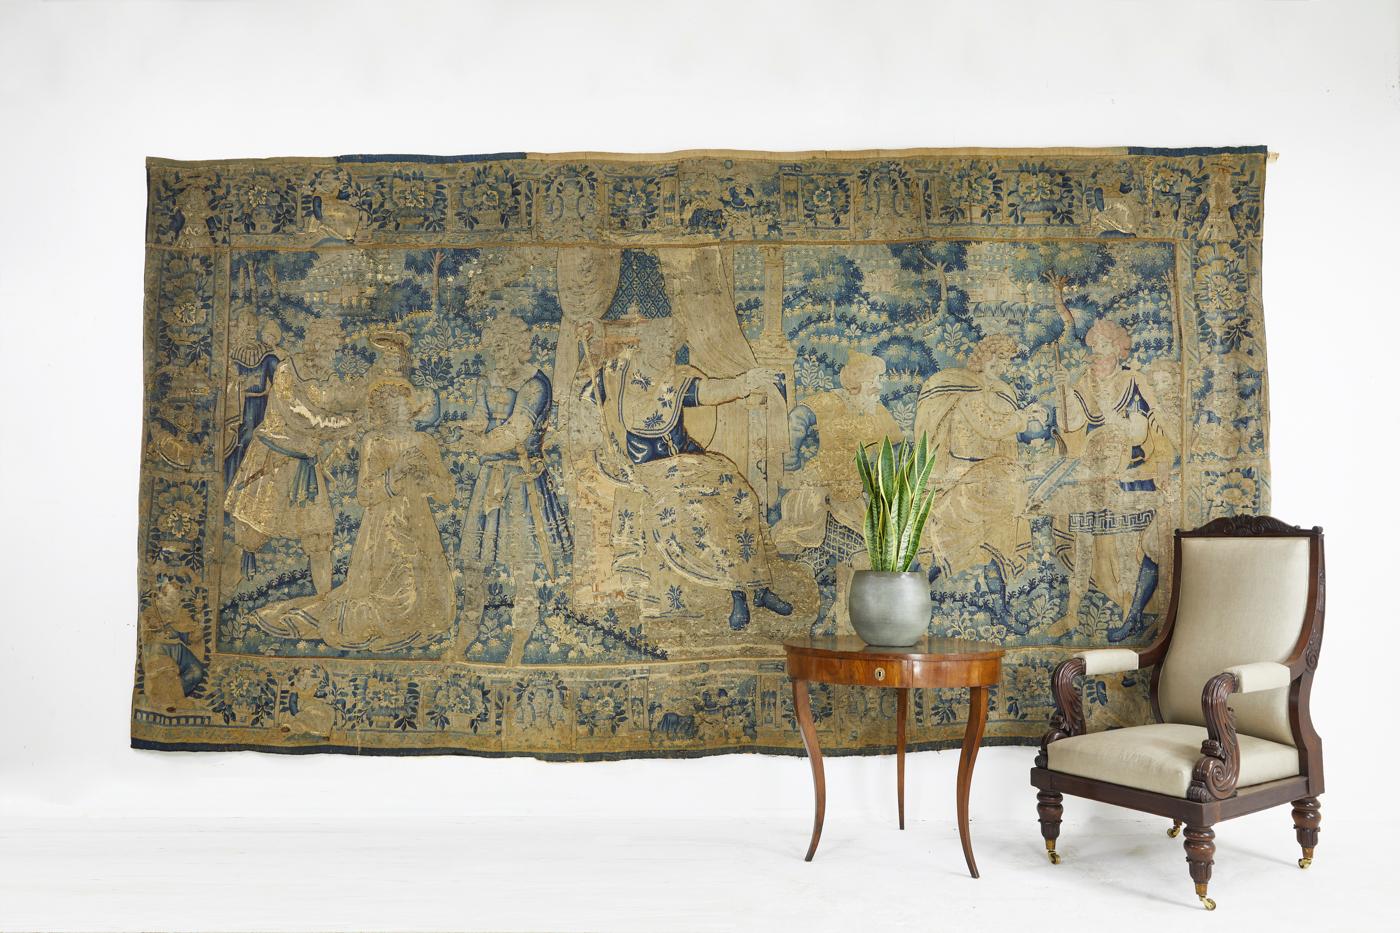 Large 16th century Flemish tapestry, beautifully faded over the centuries. Woven wool, silk and hemp. May have been reduced in height some time ago, circa 1580. Would make a beautiful backdrop.